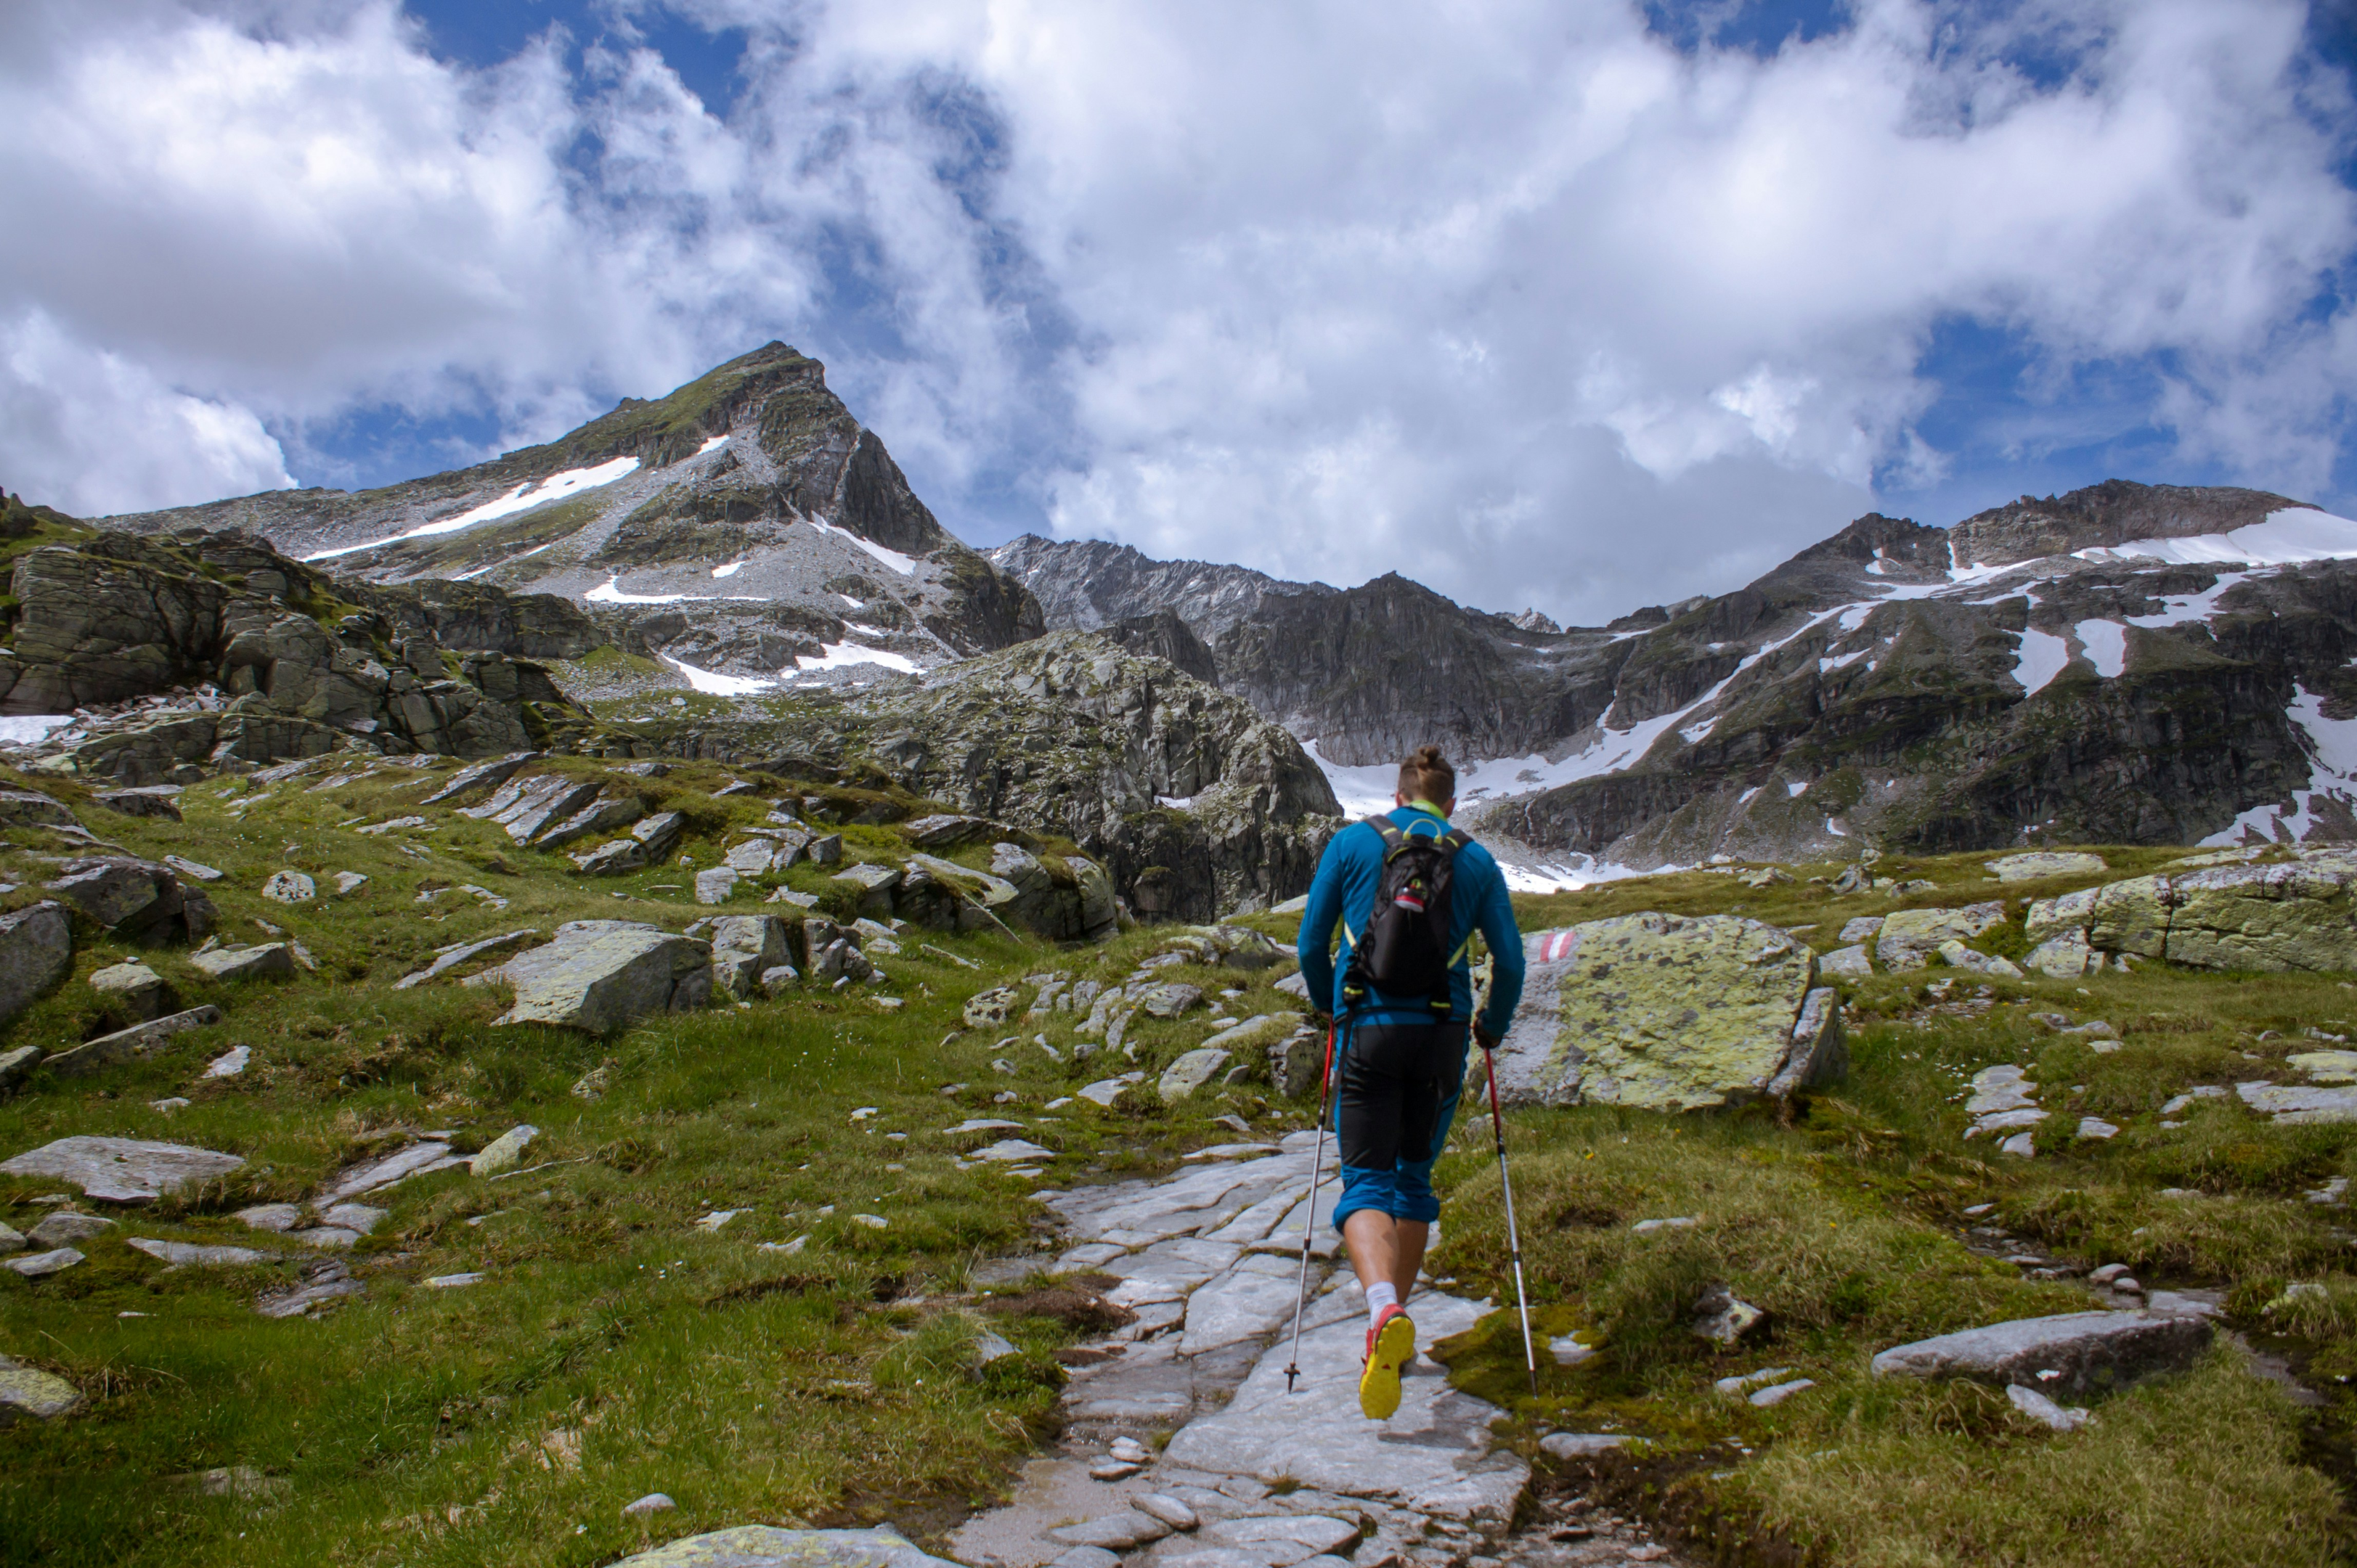 Person hiking with walking poles on uneven terrain with the mountains in front of them. Photo by Jan-Niclas Aberle on Unsplash